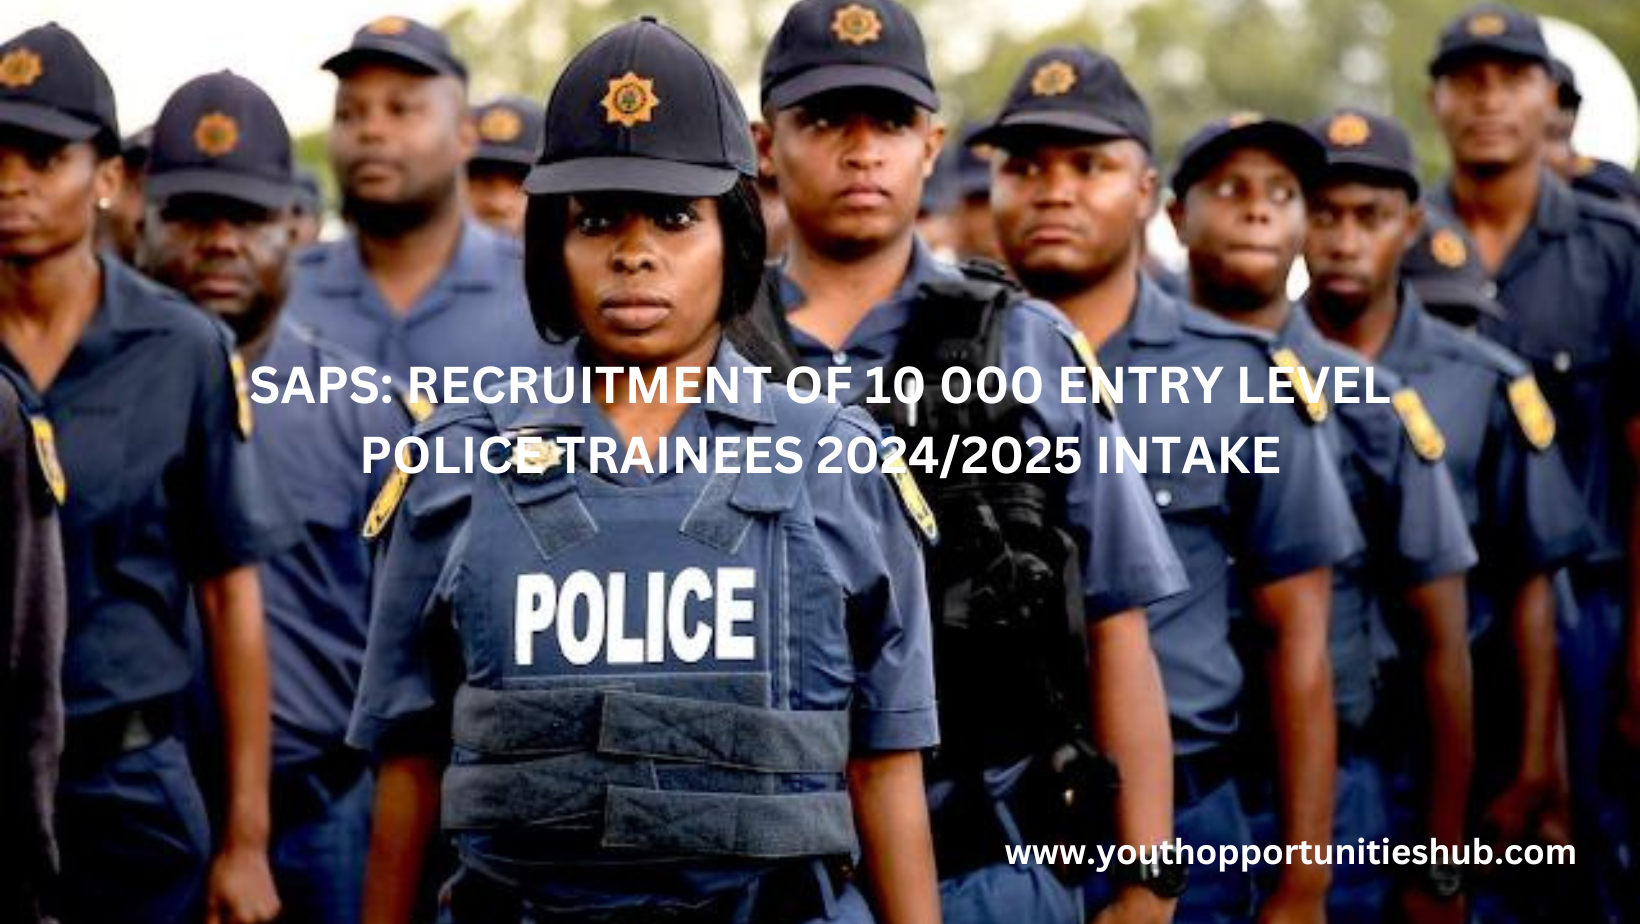 SAPS RECRUITMENT OF 10 000 ENTRY LEVEL POLICE TRAINEES 2024/2025